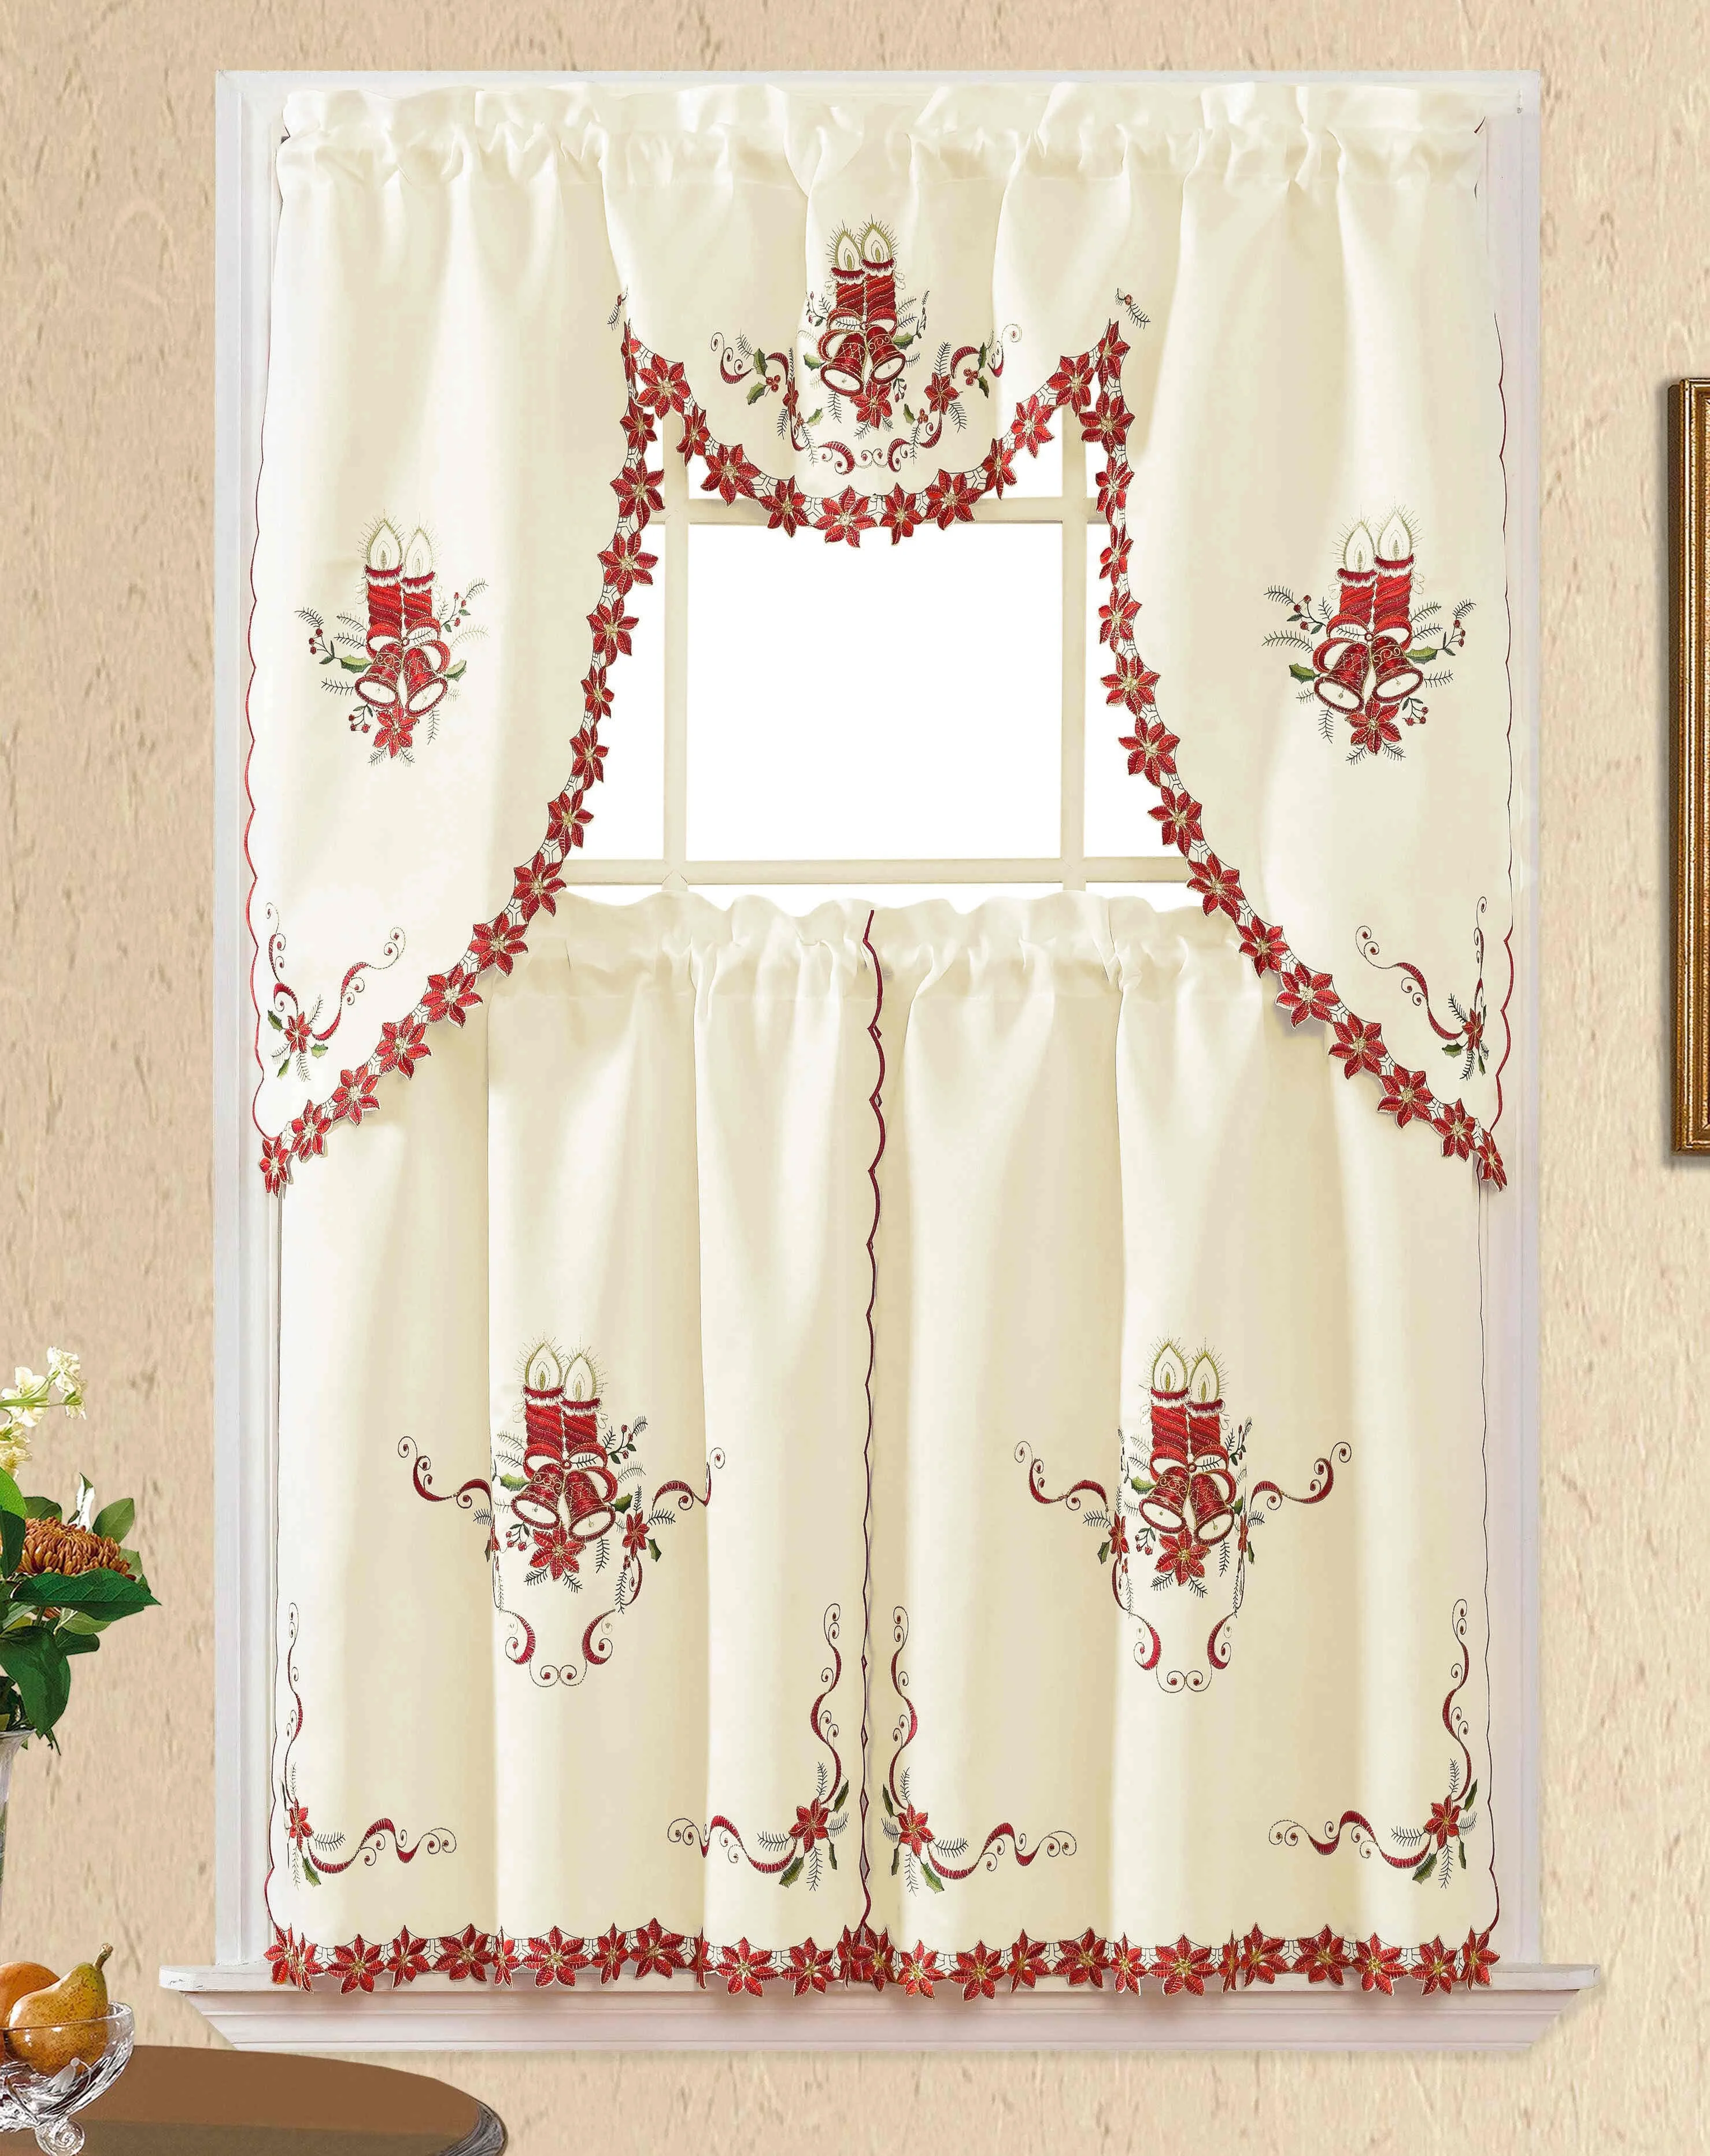 POINSETTIAS FLOWERS HOLIDAYS CHRISTMAS EMBROIDERED KITCHEN CURTAIN 3 PCS SET 